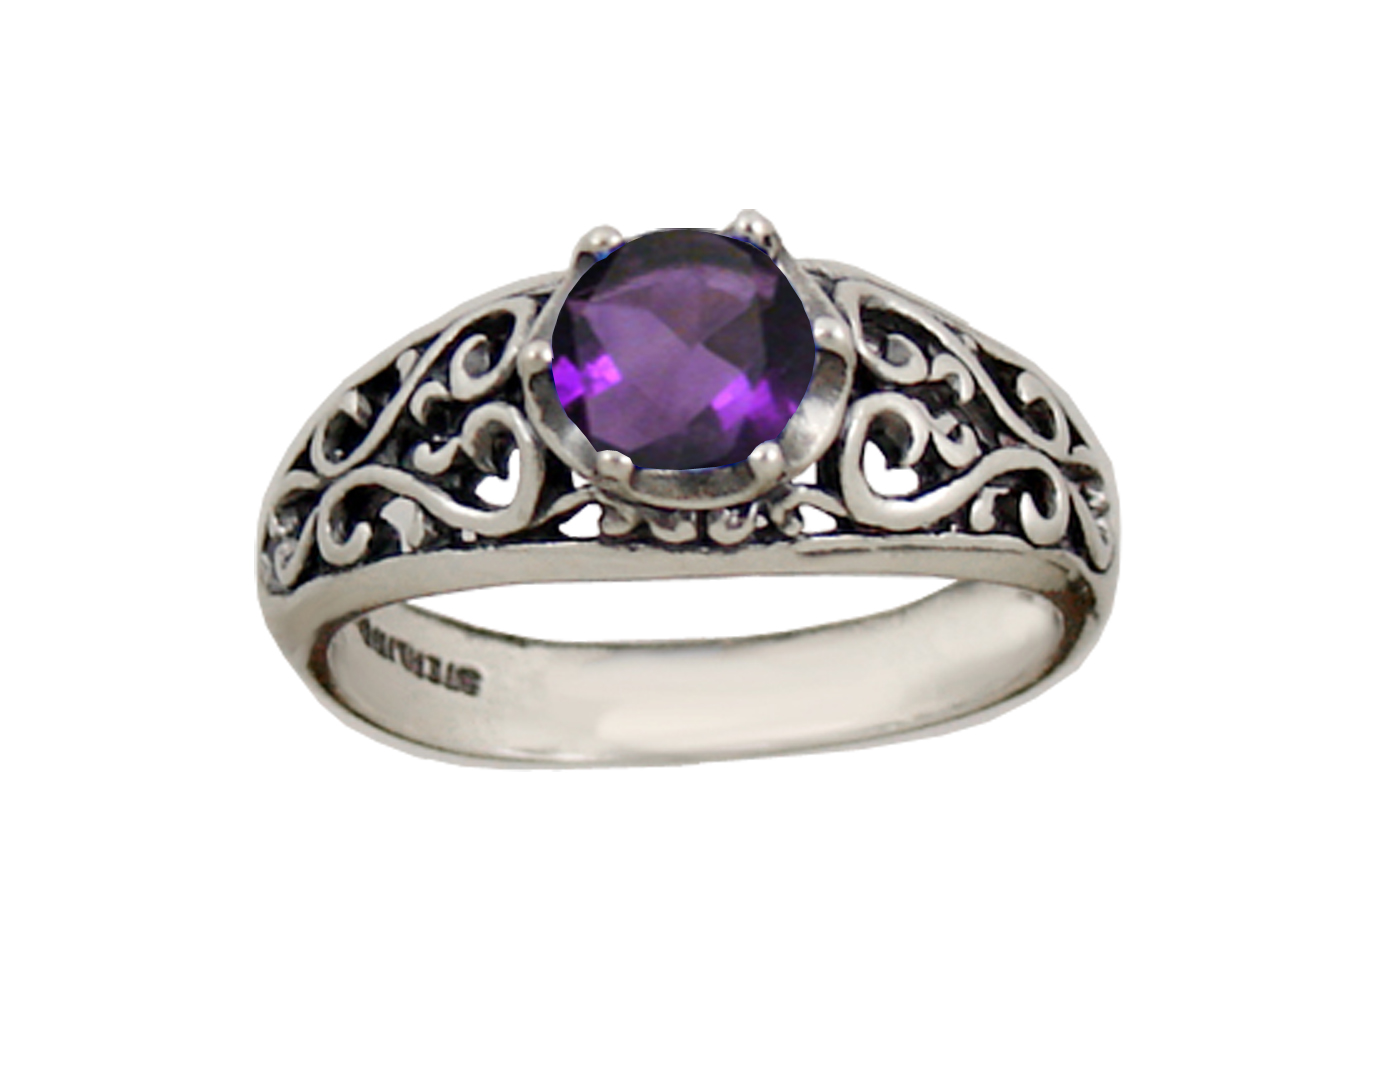 Sterling Silver Filigree Ring With Amethyst Size 9